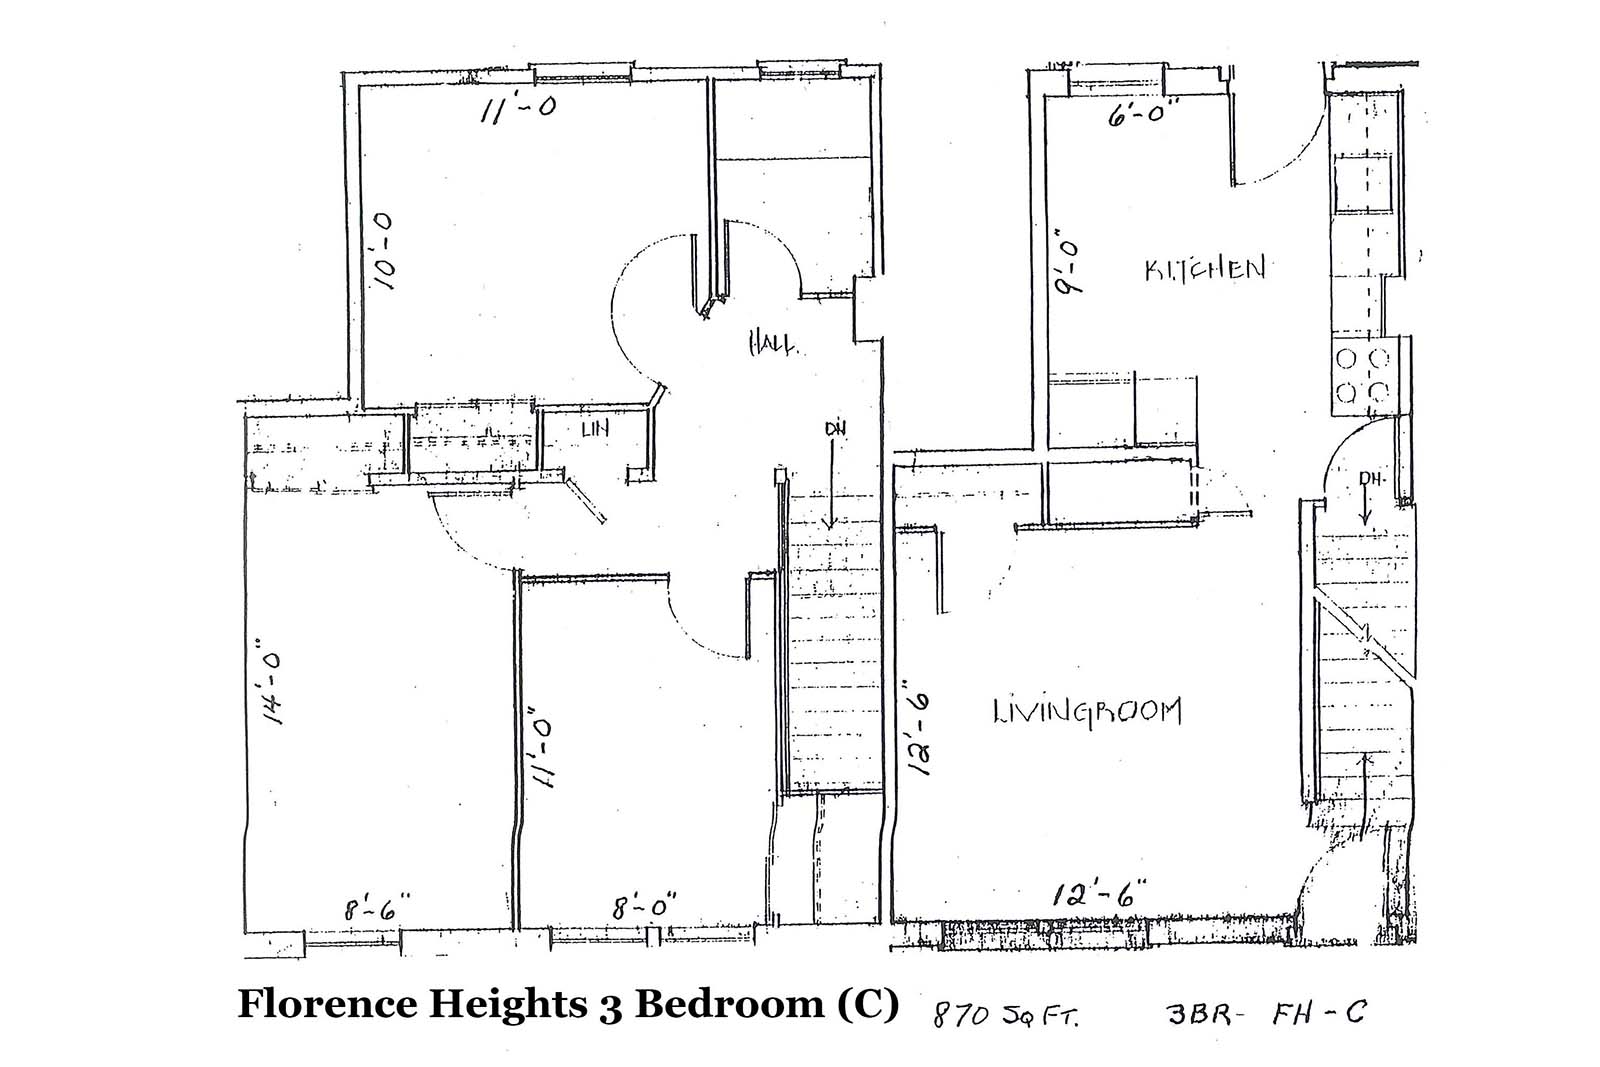 Florence Heights 3 Bedroom Layout